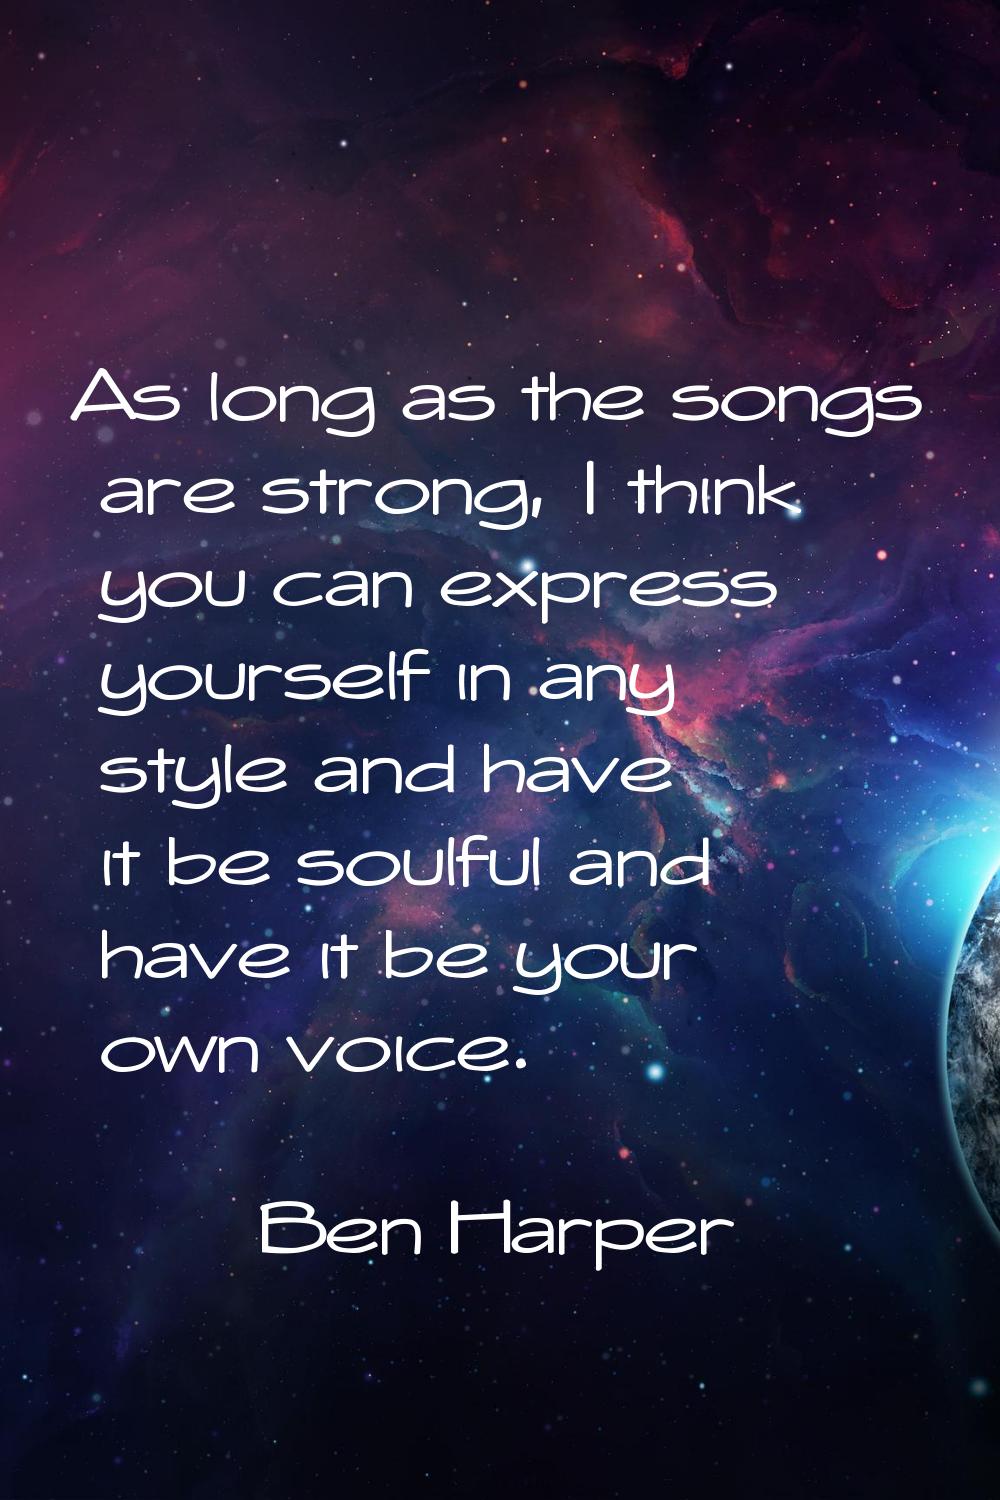 As long as the songs are strong, I think you can express yourself in any style and have it be soulf